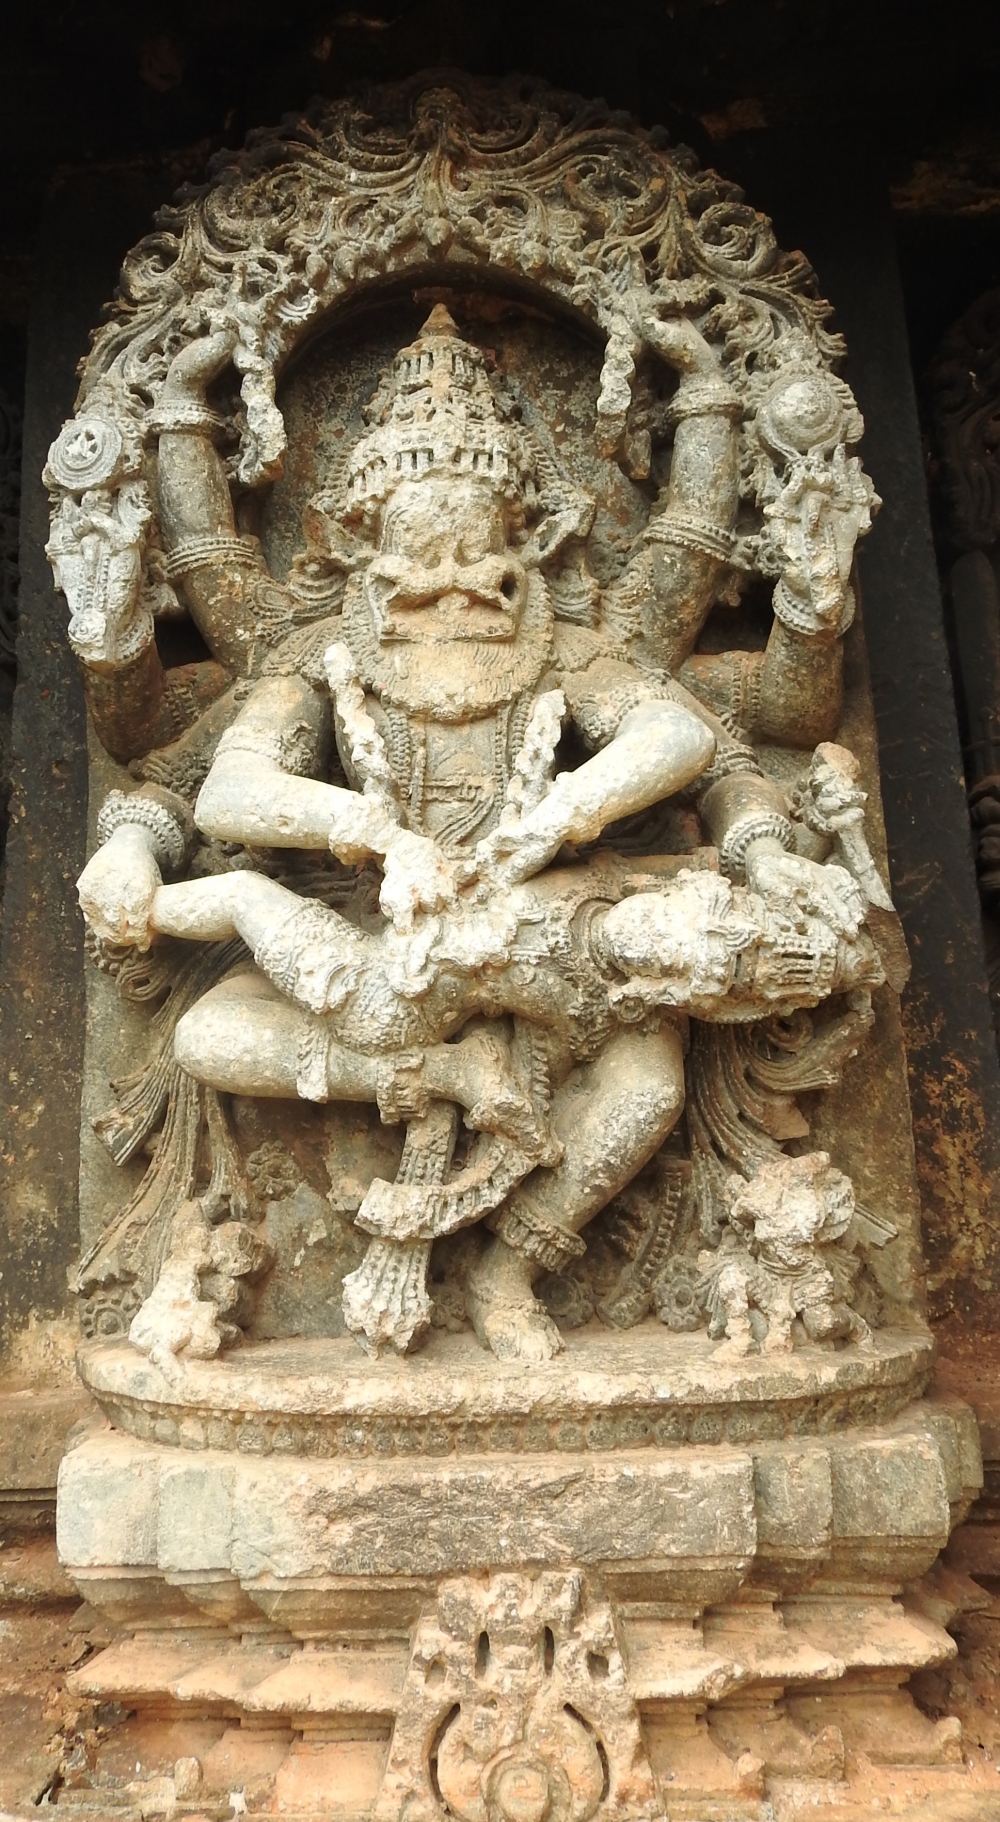 Fig. 12: A panel on the jangha shows demon Hiranyakashyapa approaching from left, Vidaraka Narasimha killing the demon by ripping open his stomach and pulling out his intestines, and Pralhada standing on the right in anjalimudra.